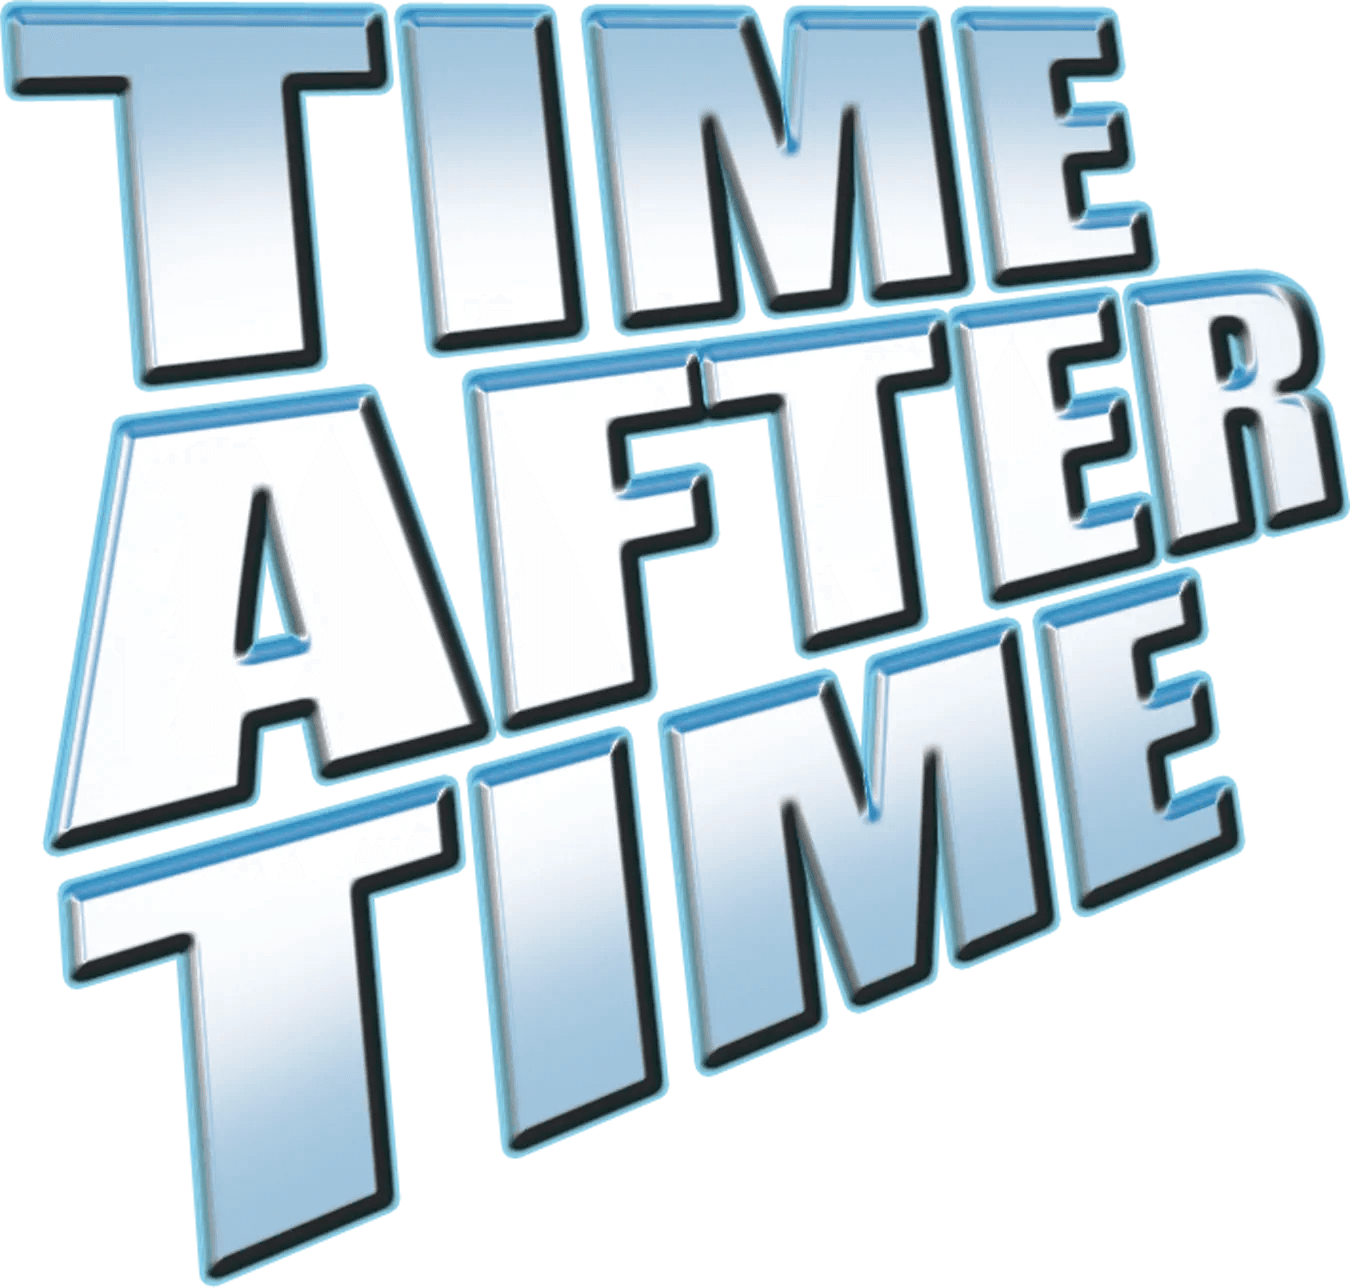 Time After Time logo